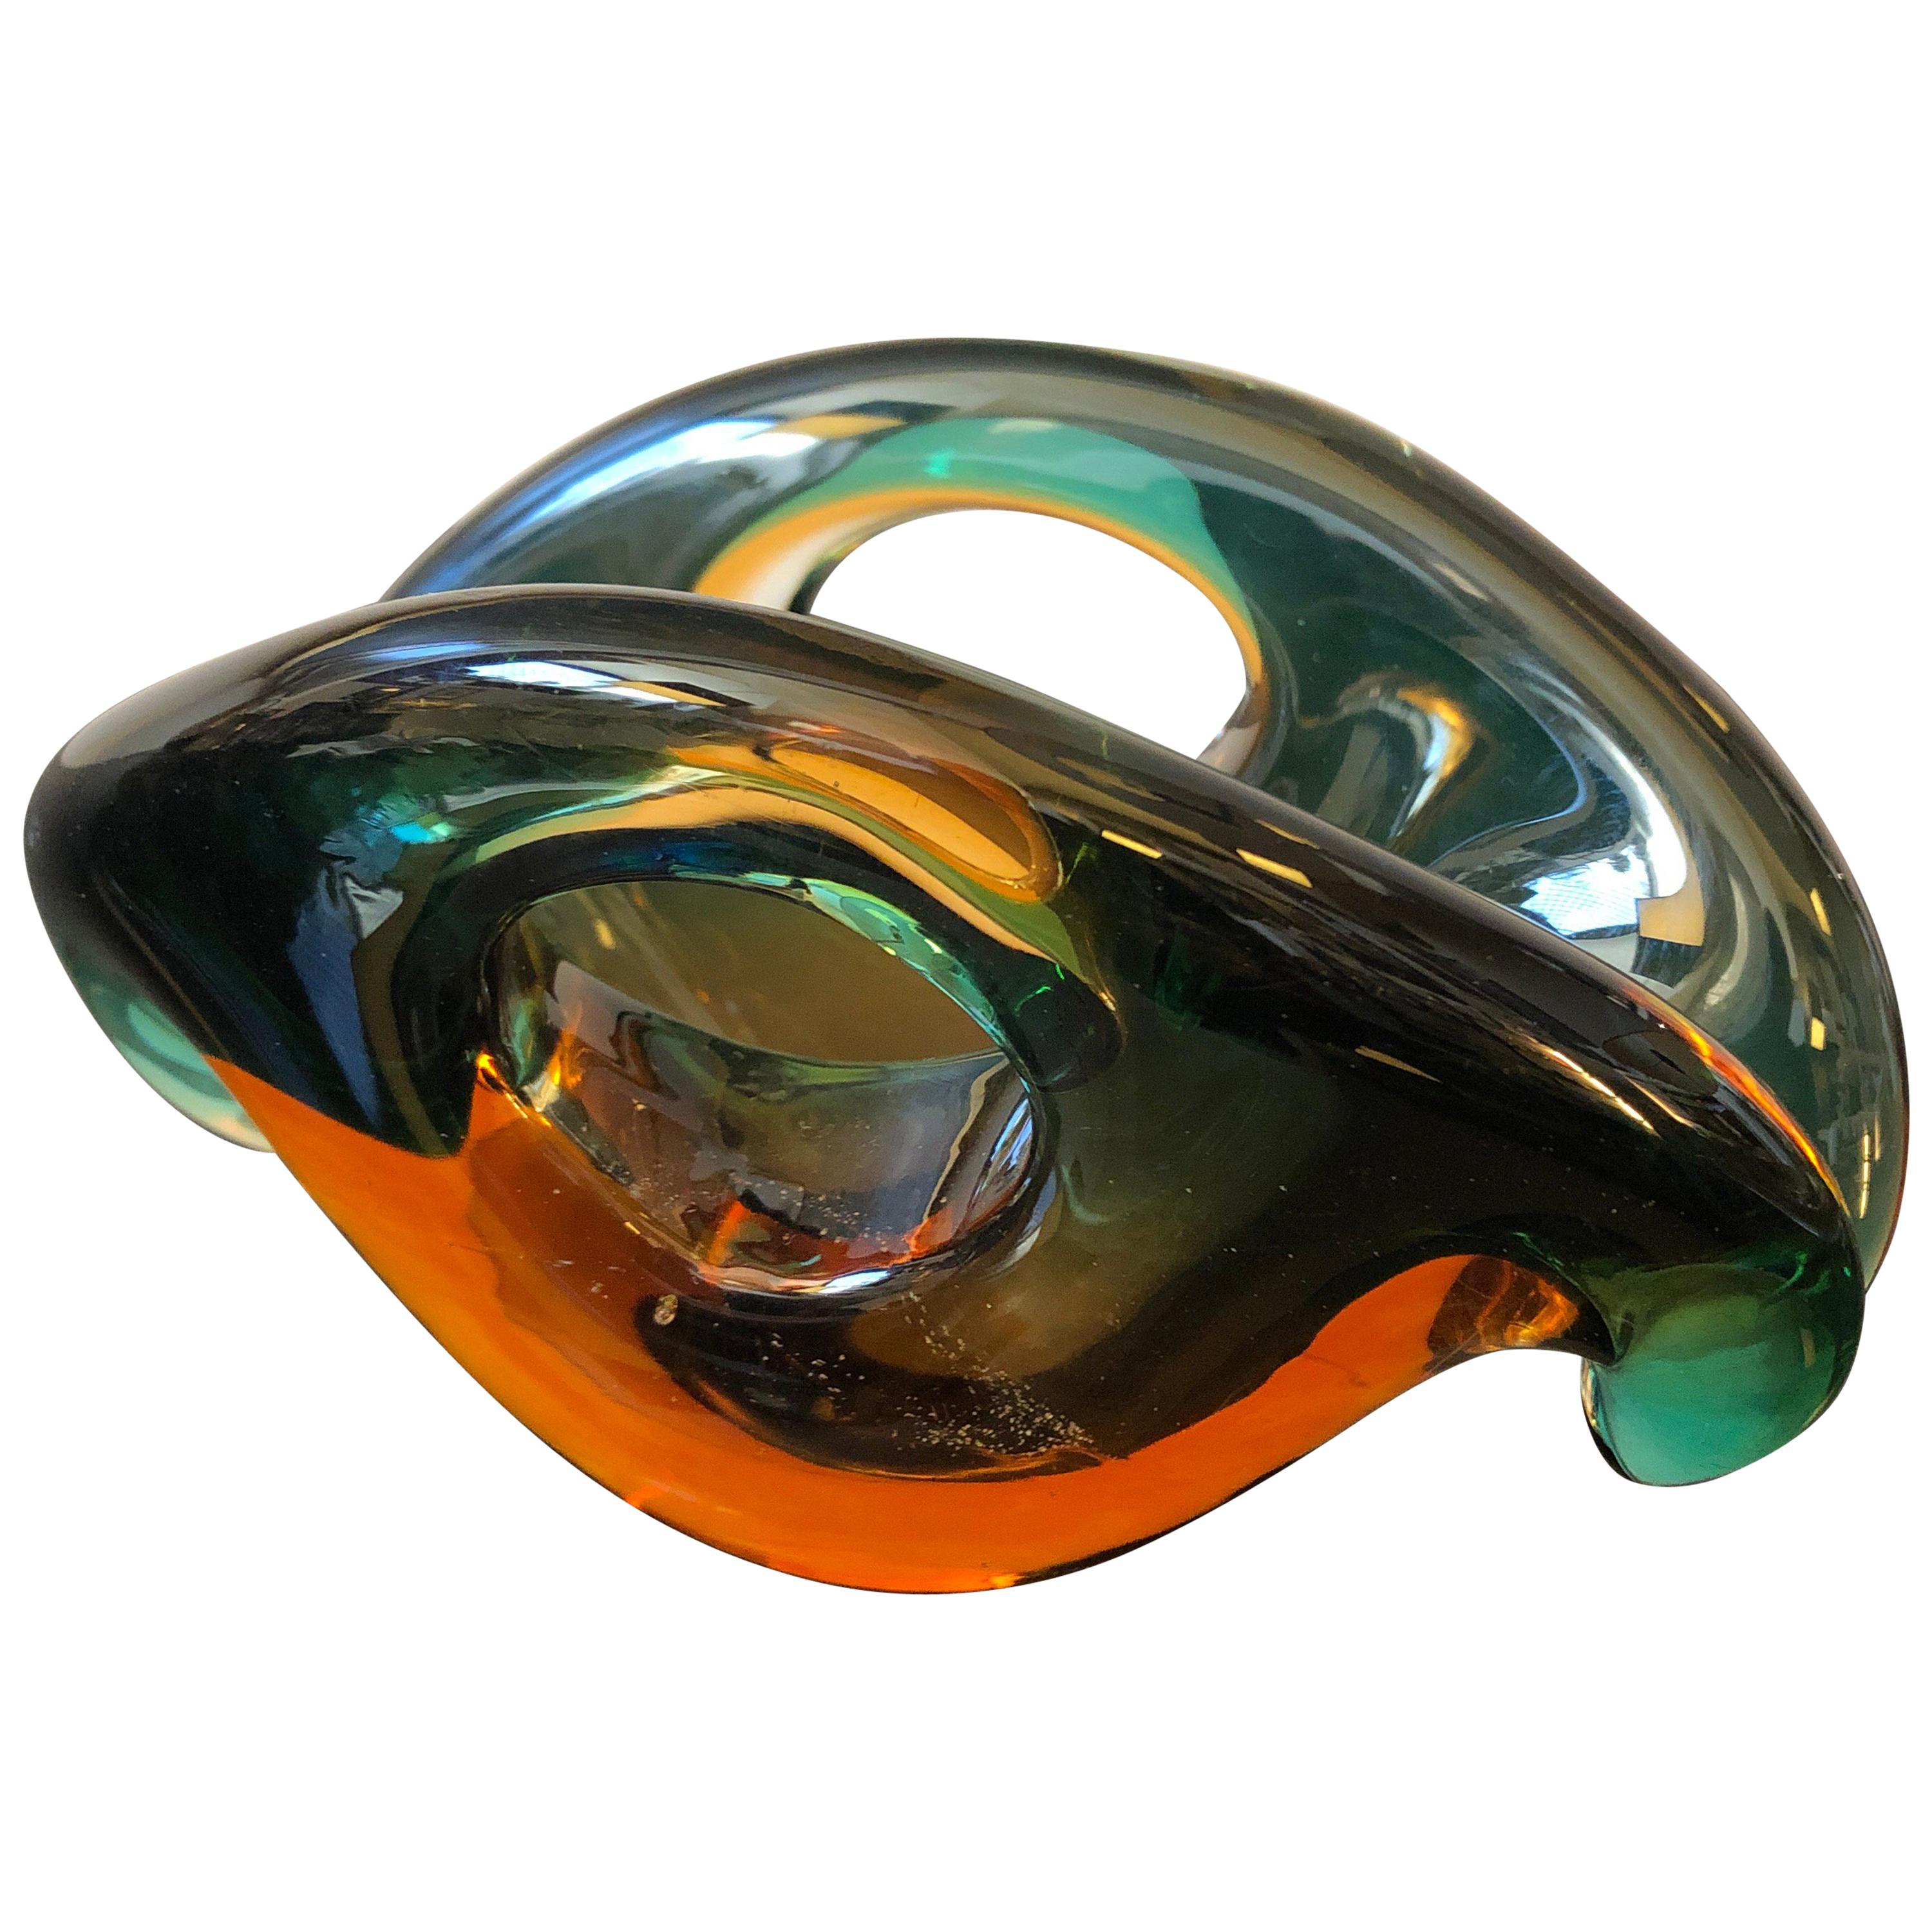 Mid-Century Modern Sommerso Murano Glass Bowl by Archimede Seguso, circa 1970